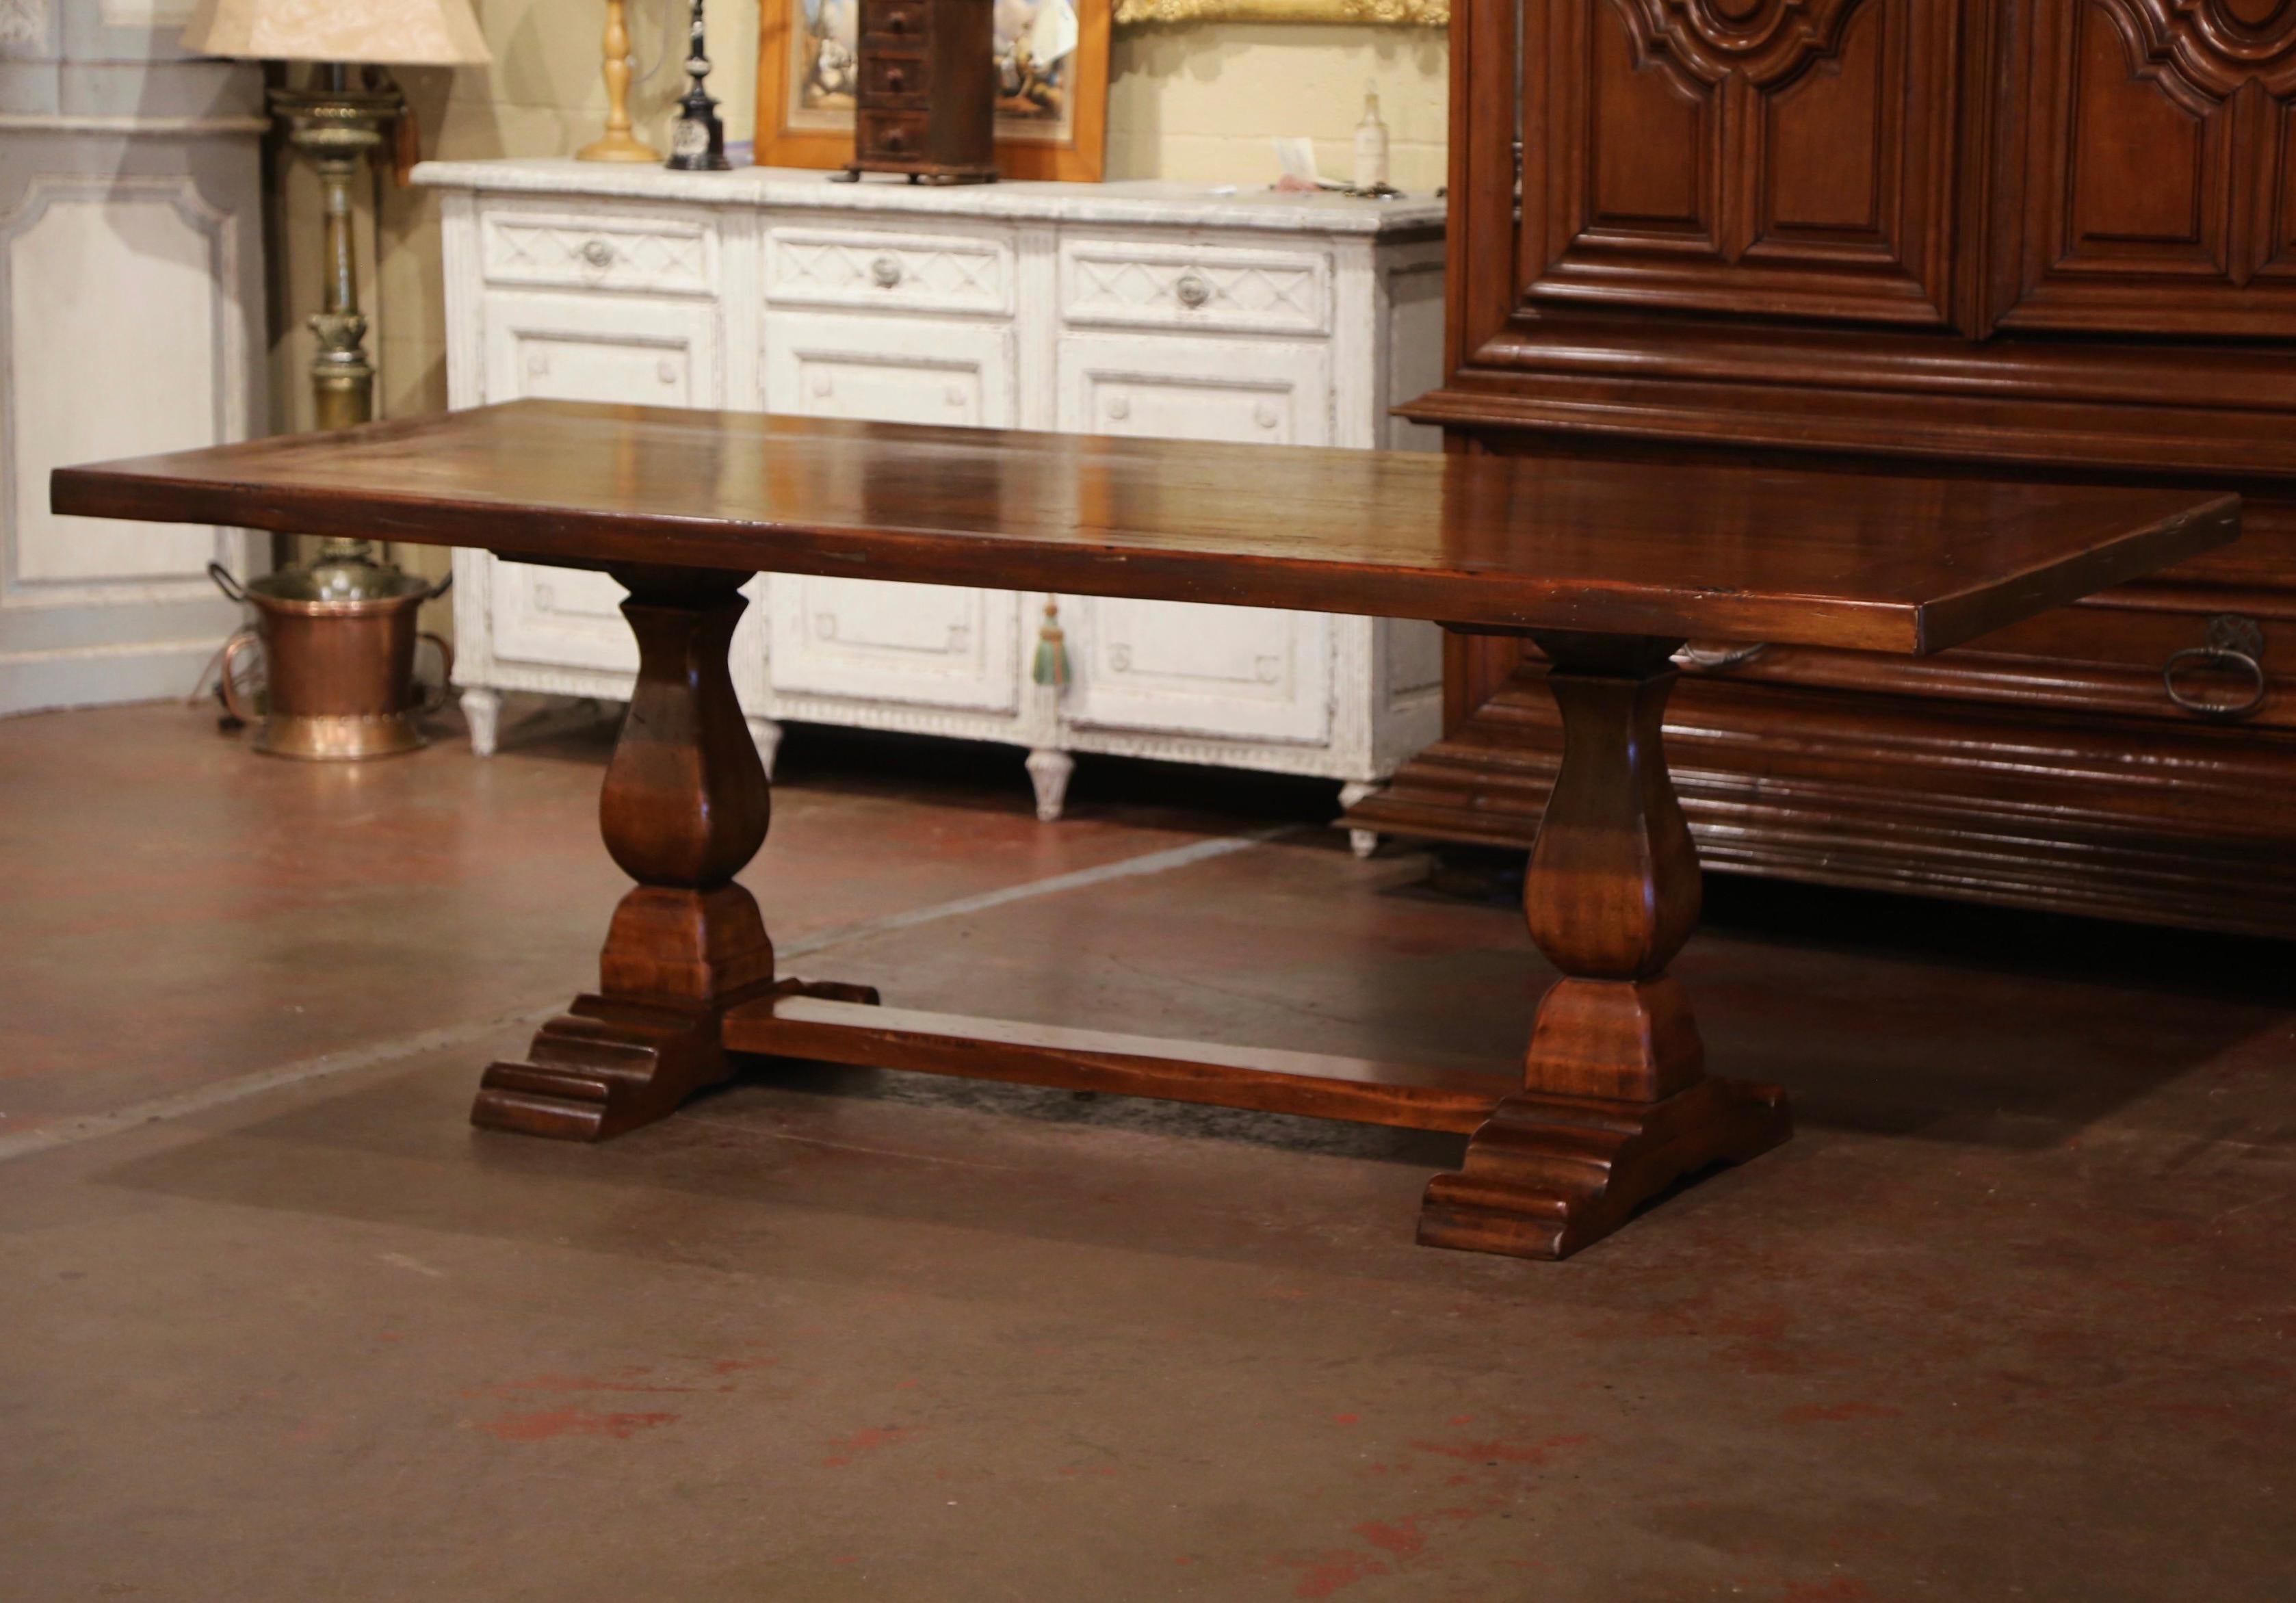 This elegant antique refectory dining table was crafted in France, circa 1920. Standing on two carved baluster form legs ending with shoe feet and joined with a bottom stretcher, the Baroque monastery table is dressed with a solid 2